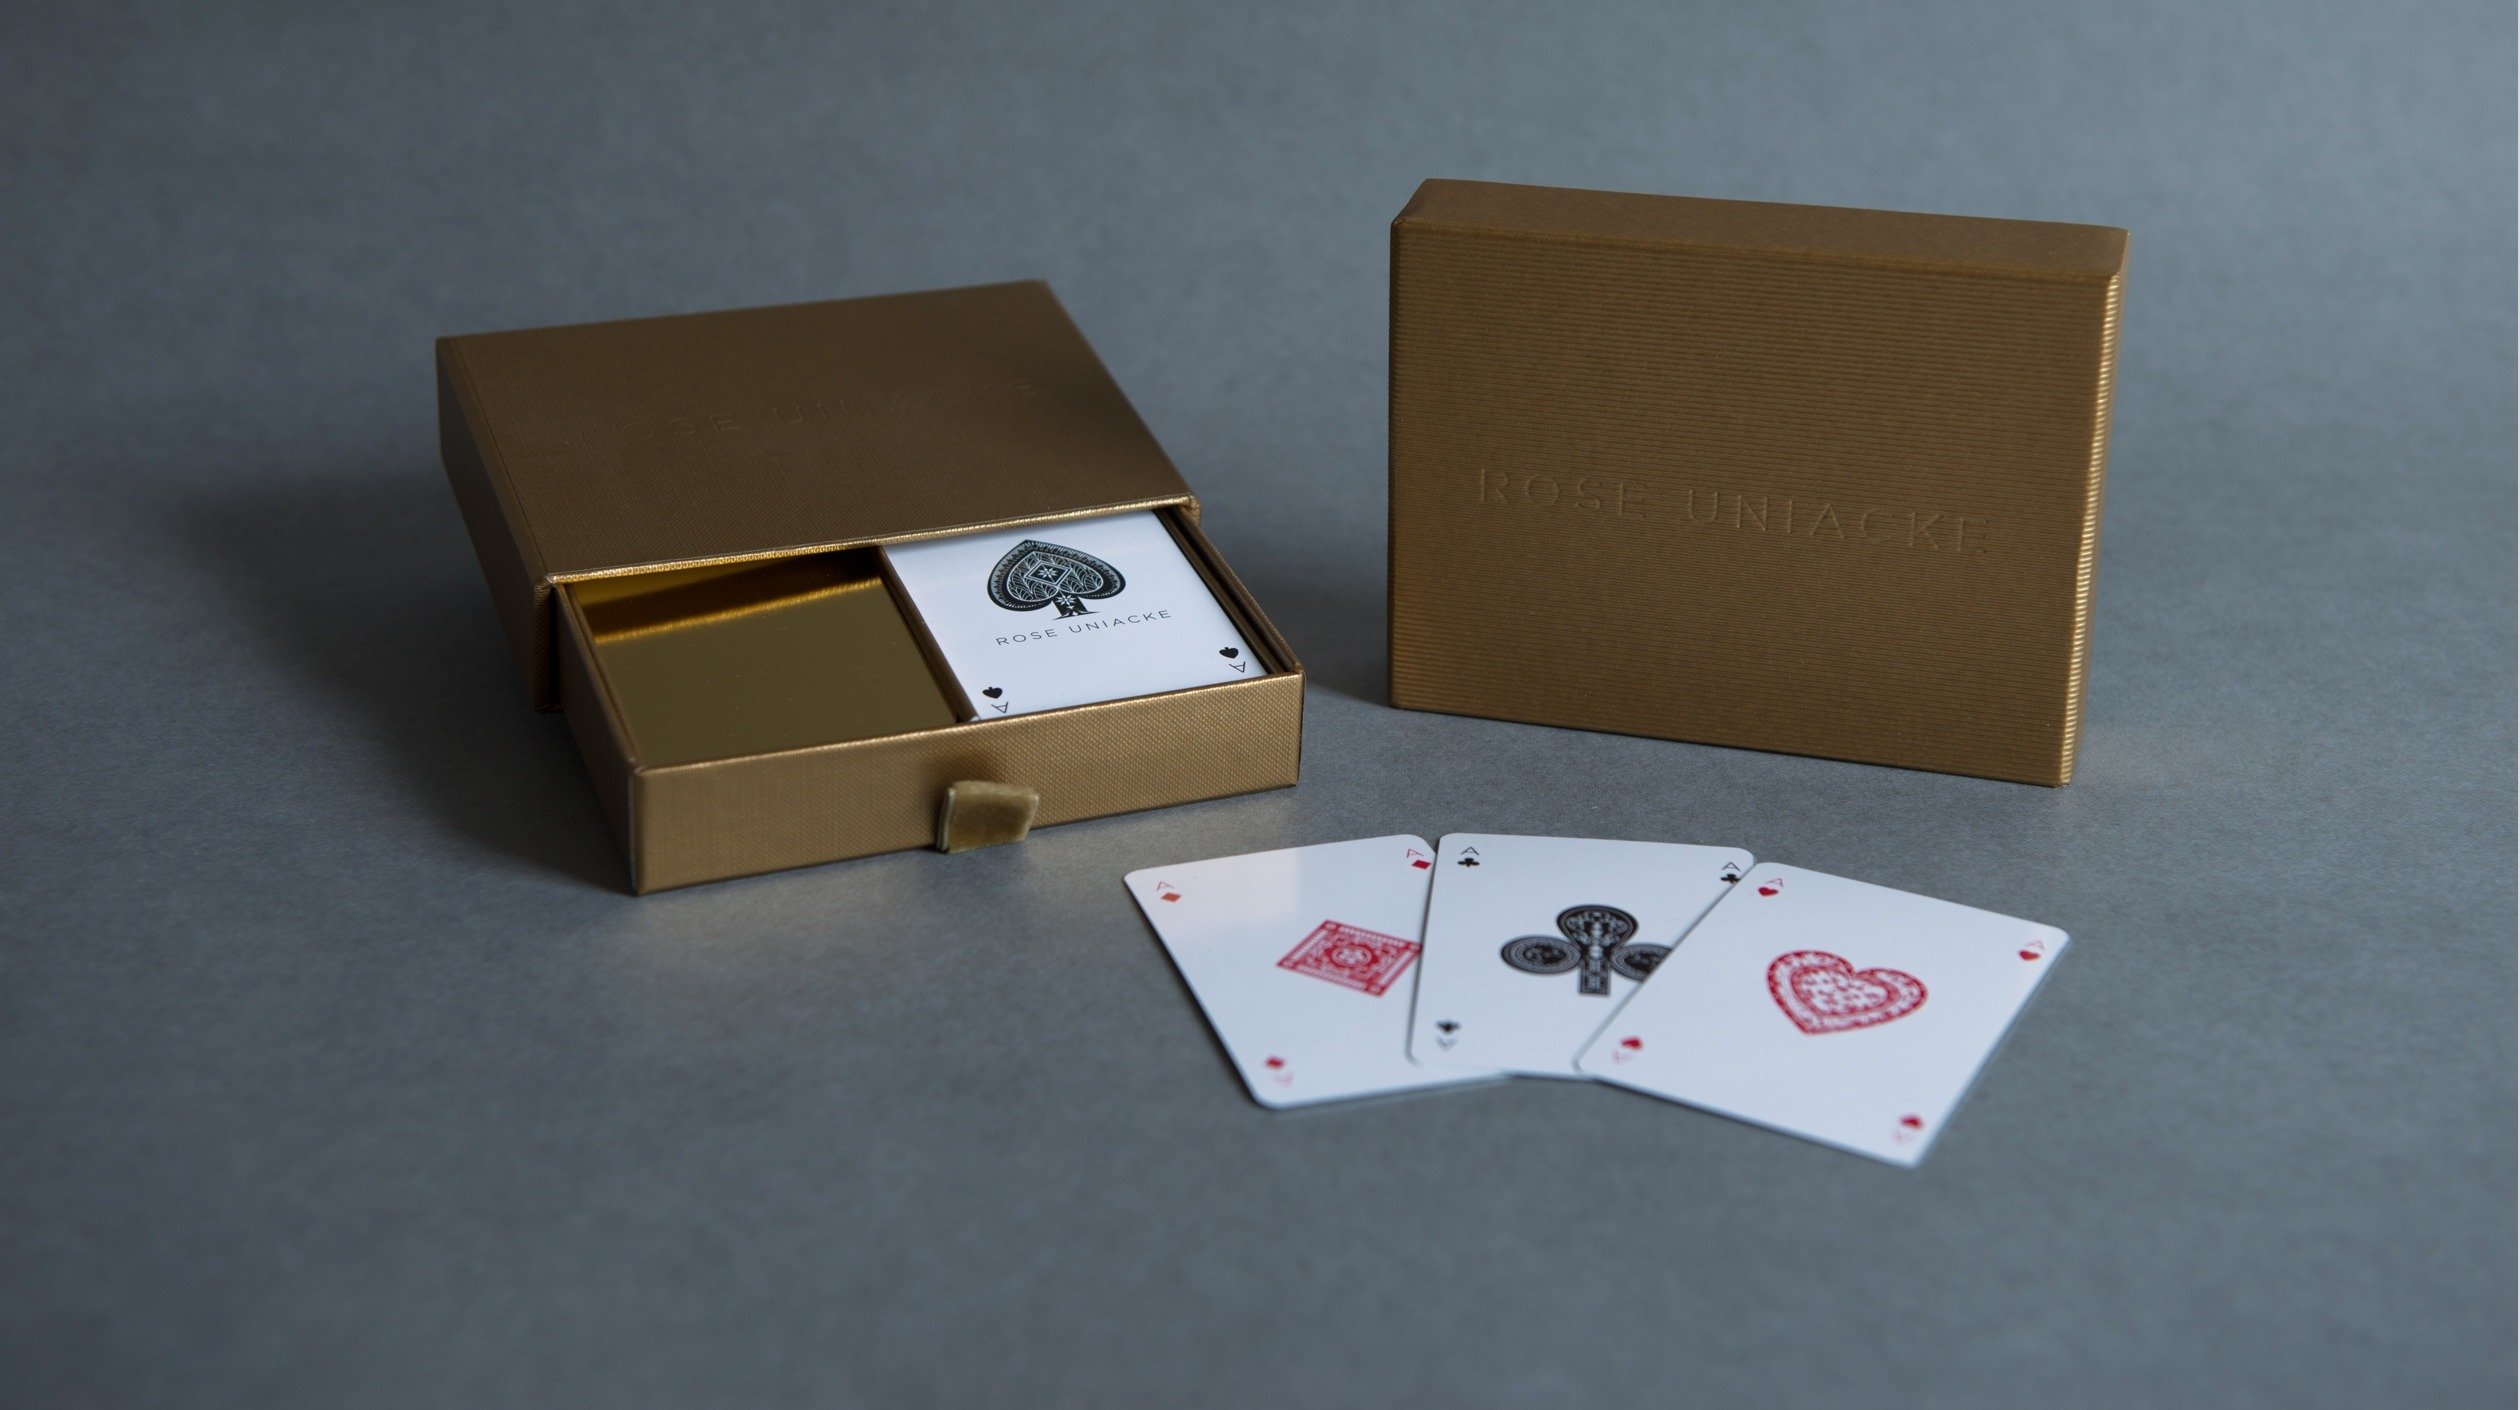 rose uniacke playing cards and box